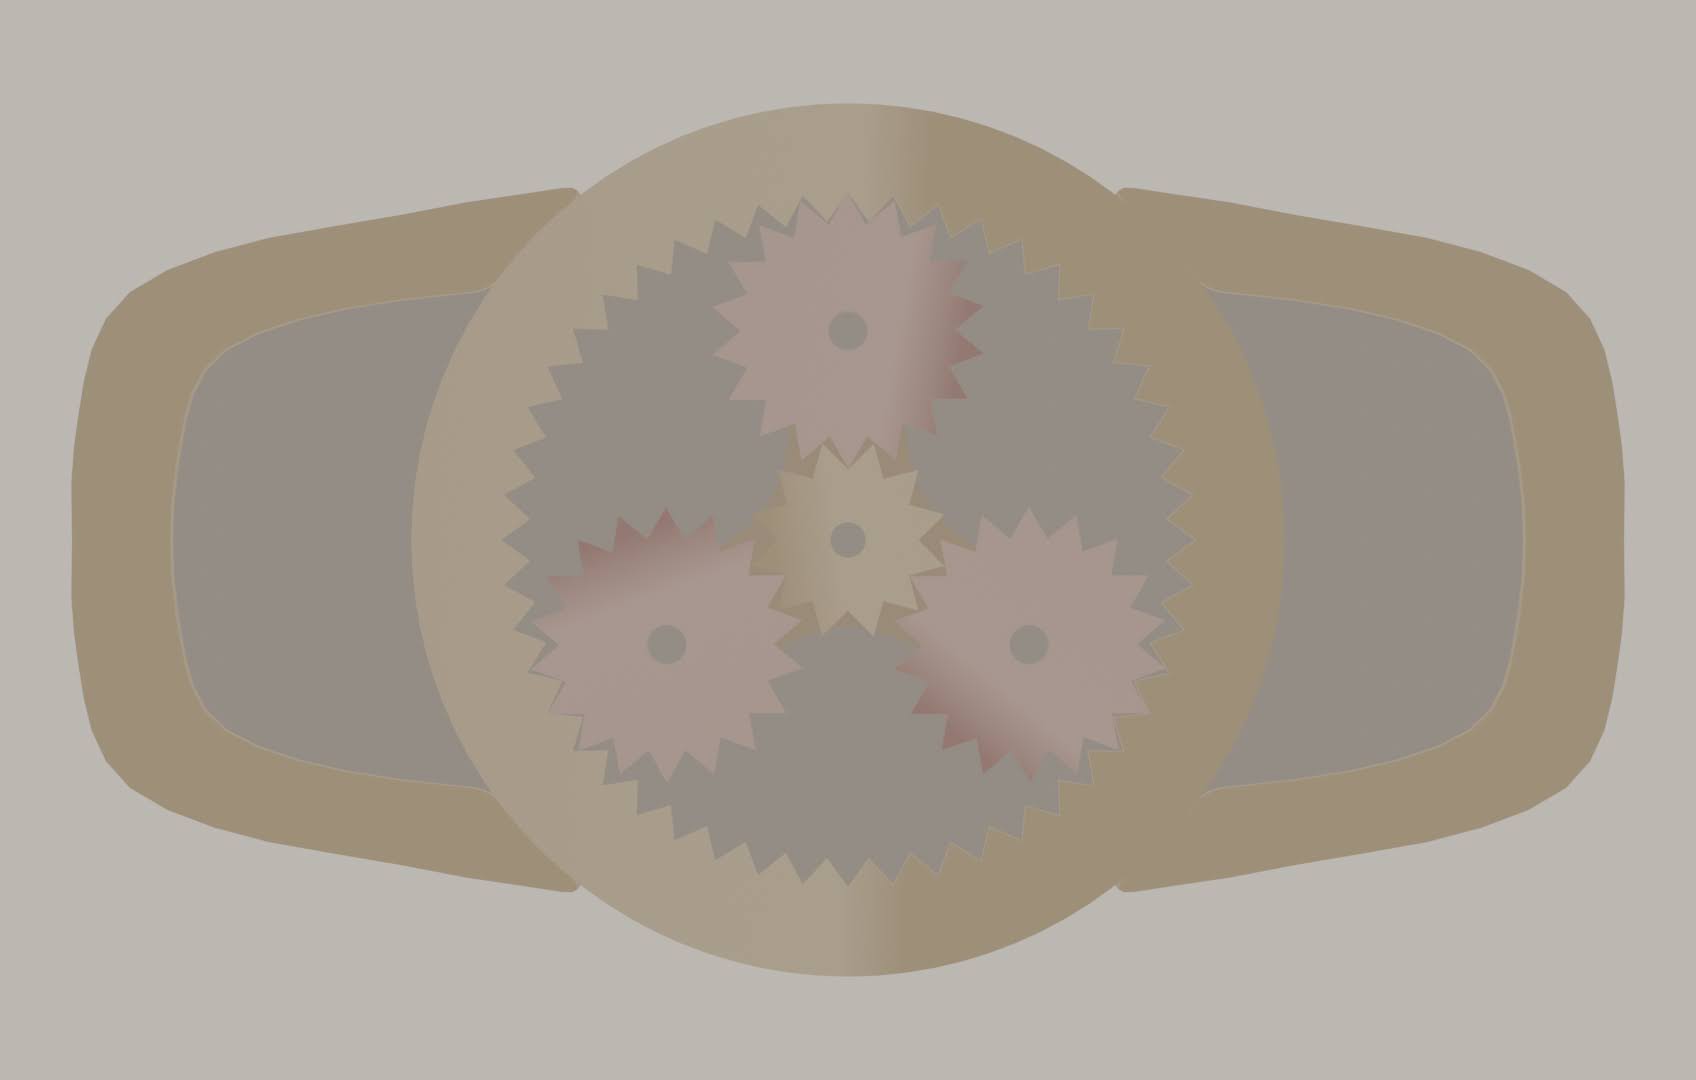 a computer render of the belt buckle concept